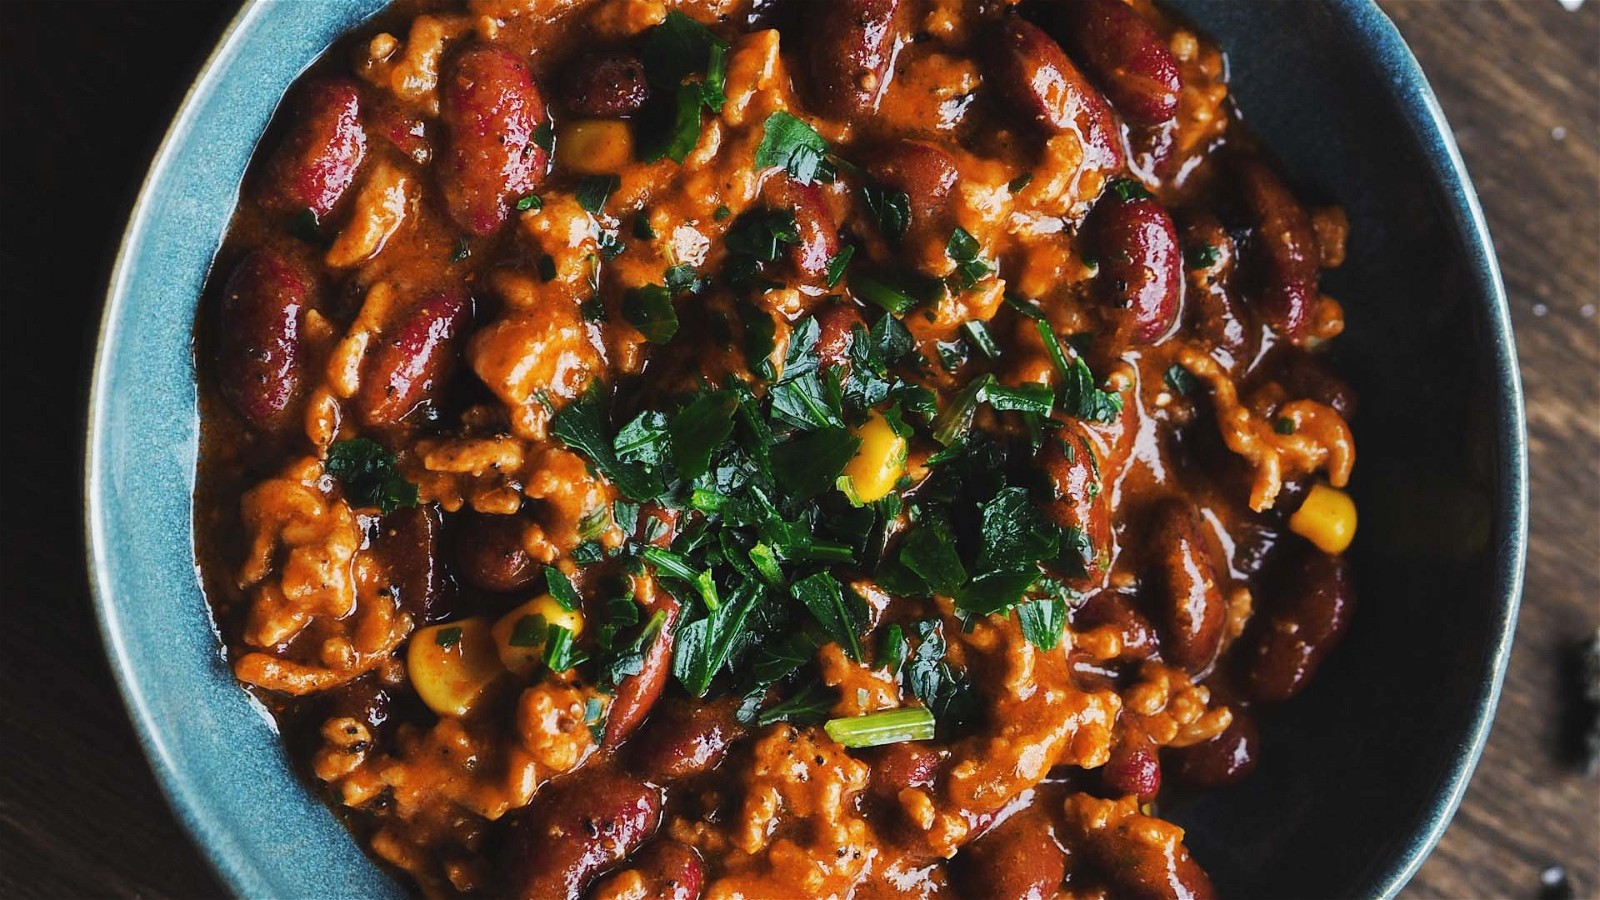 Image of Homemade Chili Con Carne